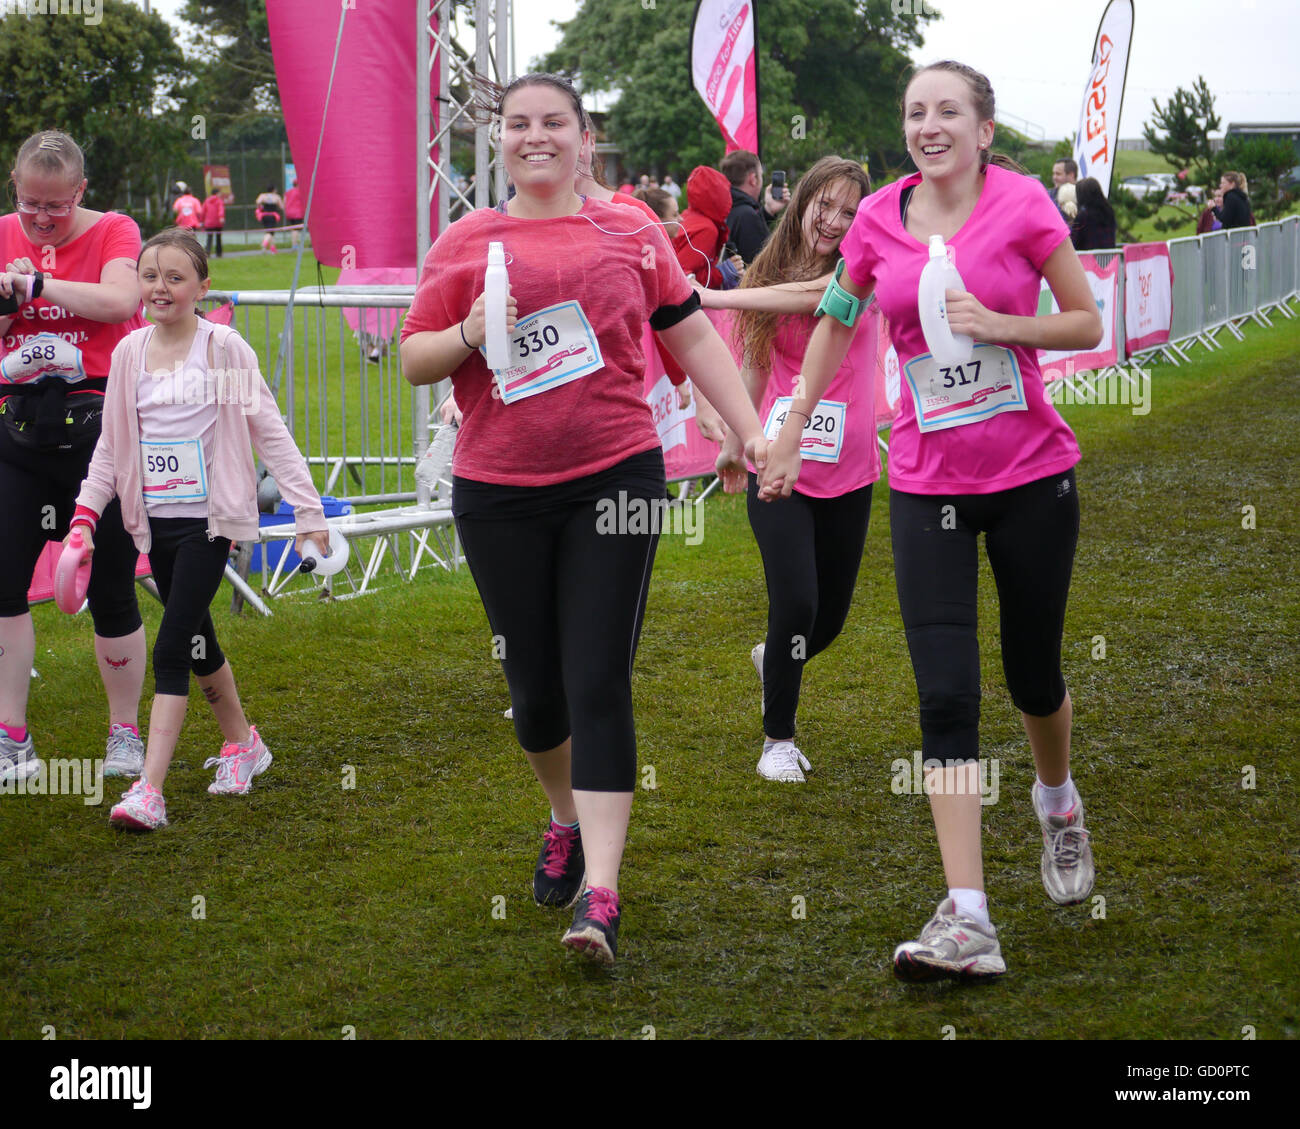 Portsmouth, Hampshire, UK. 10 July 2016. Two friends cross the finish line holding hands, at the end of the Race for life. The Race for life is a charity event in which females complete a 10Km or 5Km run in aid of cancer reseach. Credit:  simon evans/Alamy Live News Stock Photo